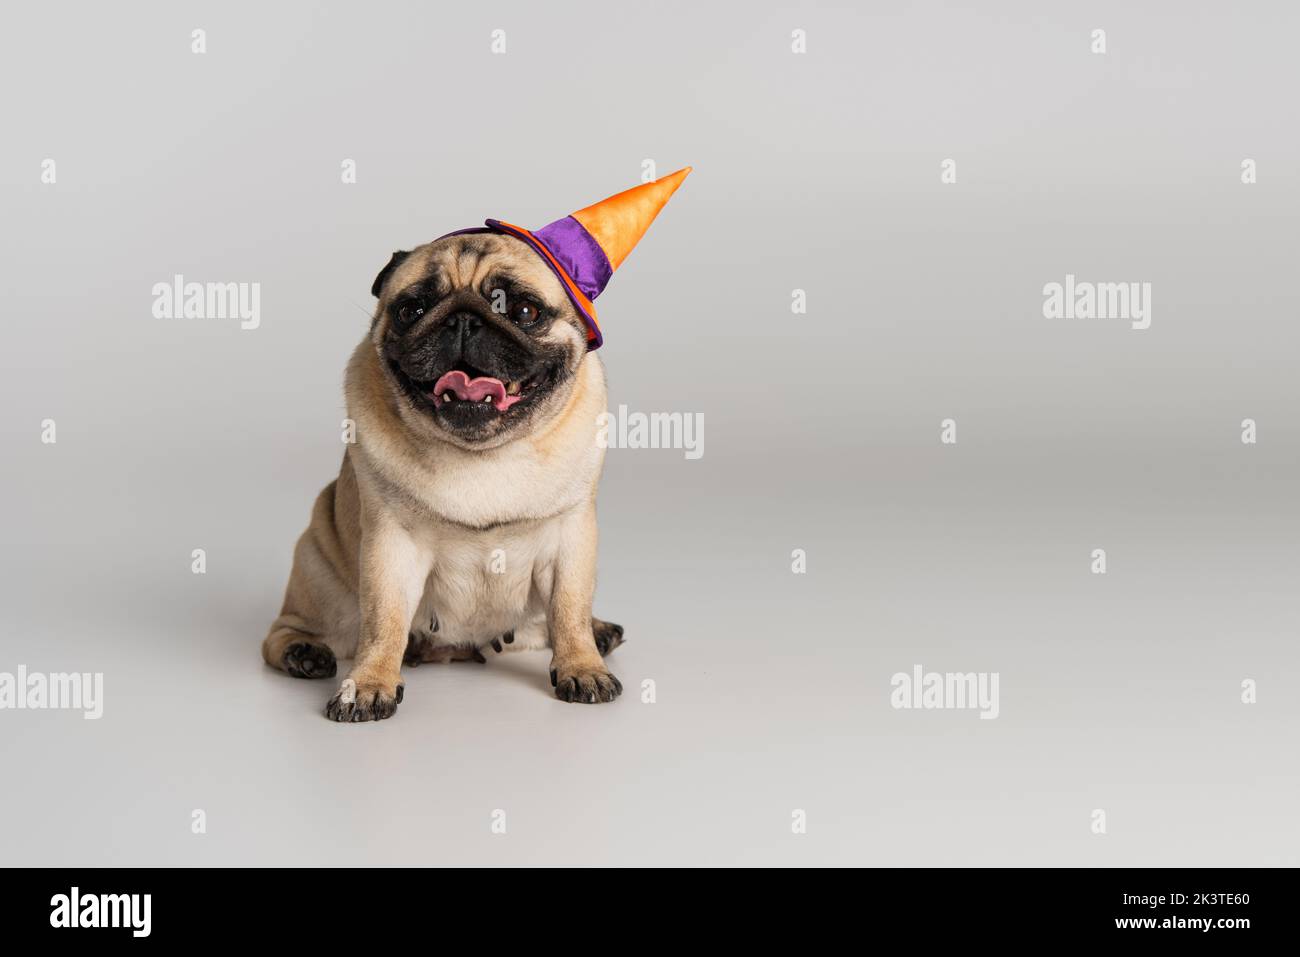 purebred pug dog in halloween pointed hat sitting on grey background,stock image Stock Photo